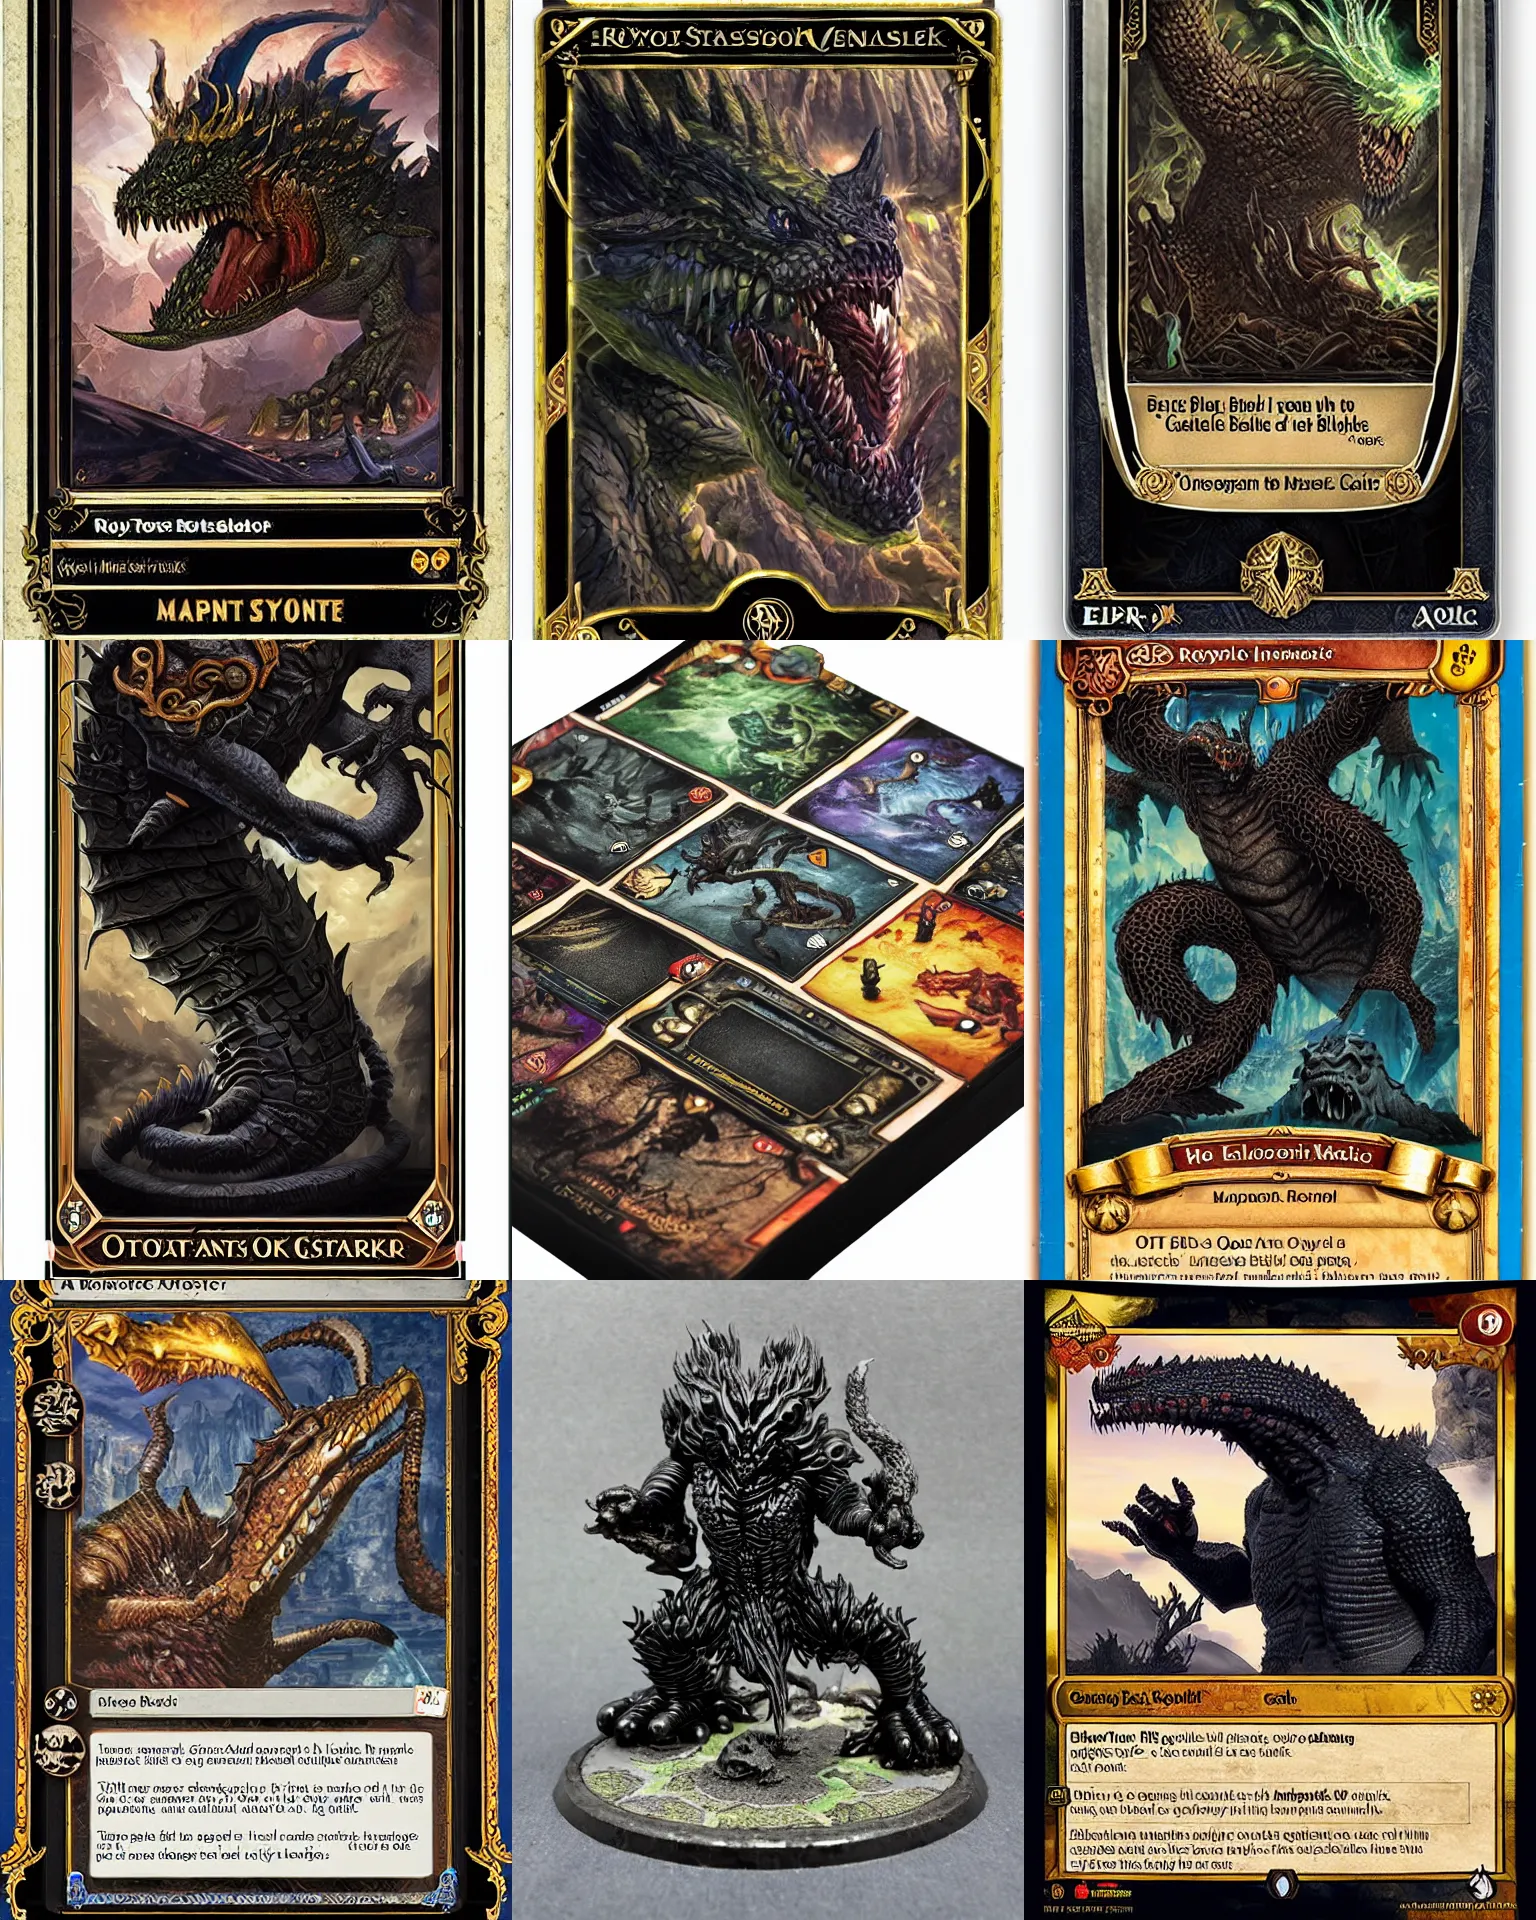 Prompt: a giant monster epic royal stone basilisk, obsidian black creature, magic : the gathering